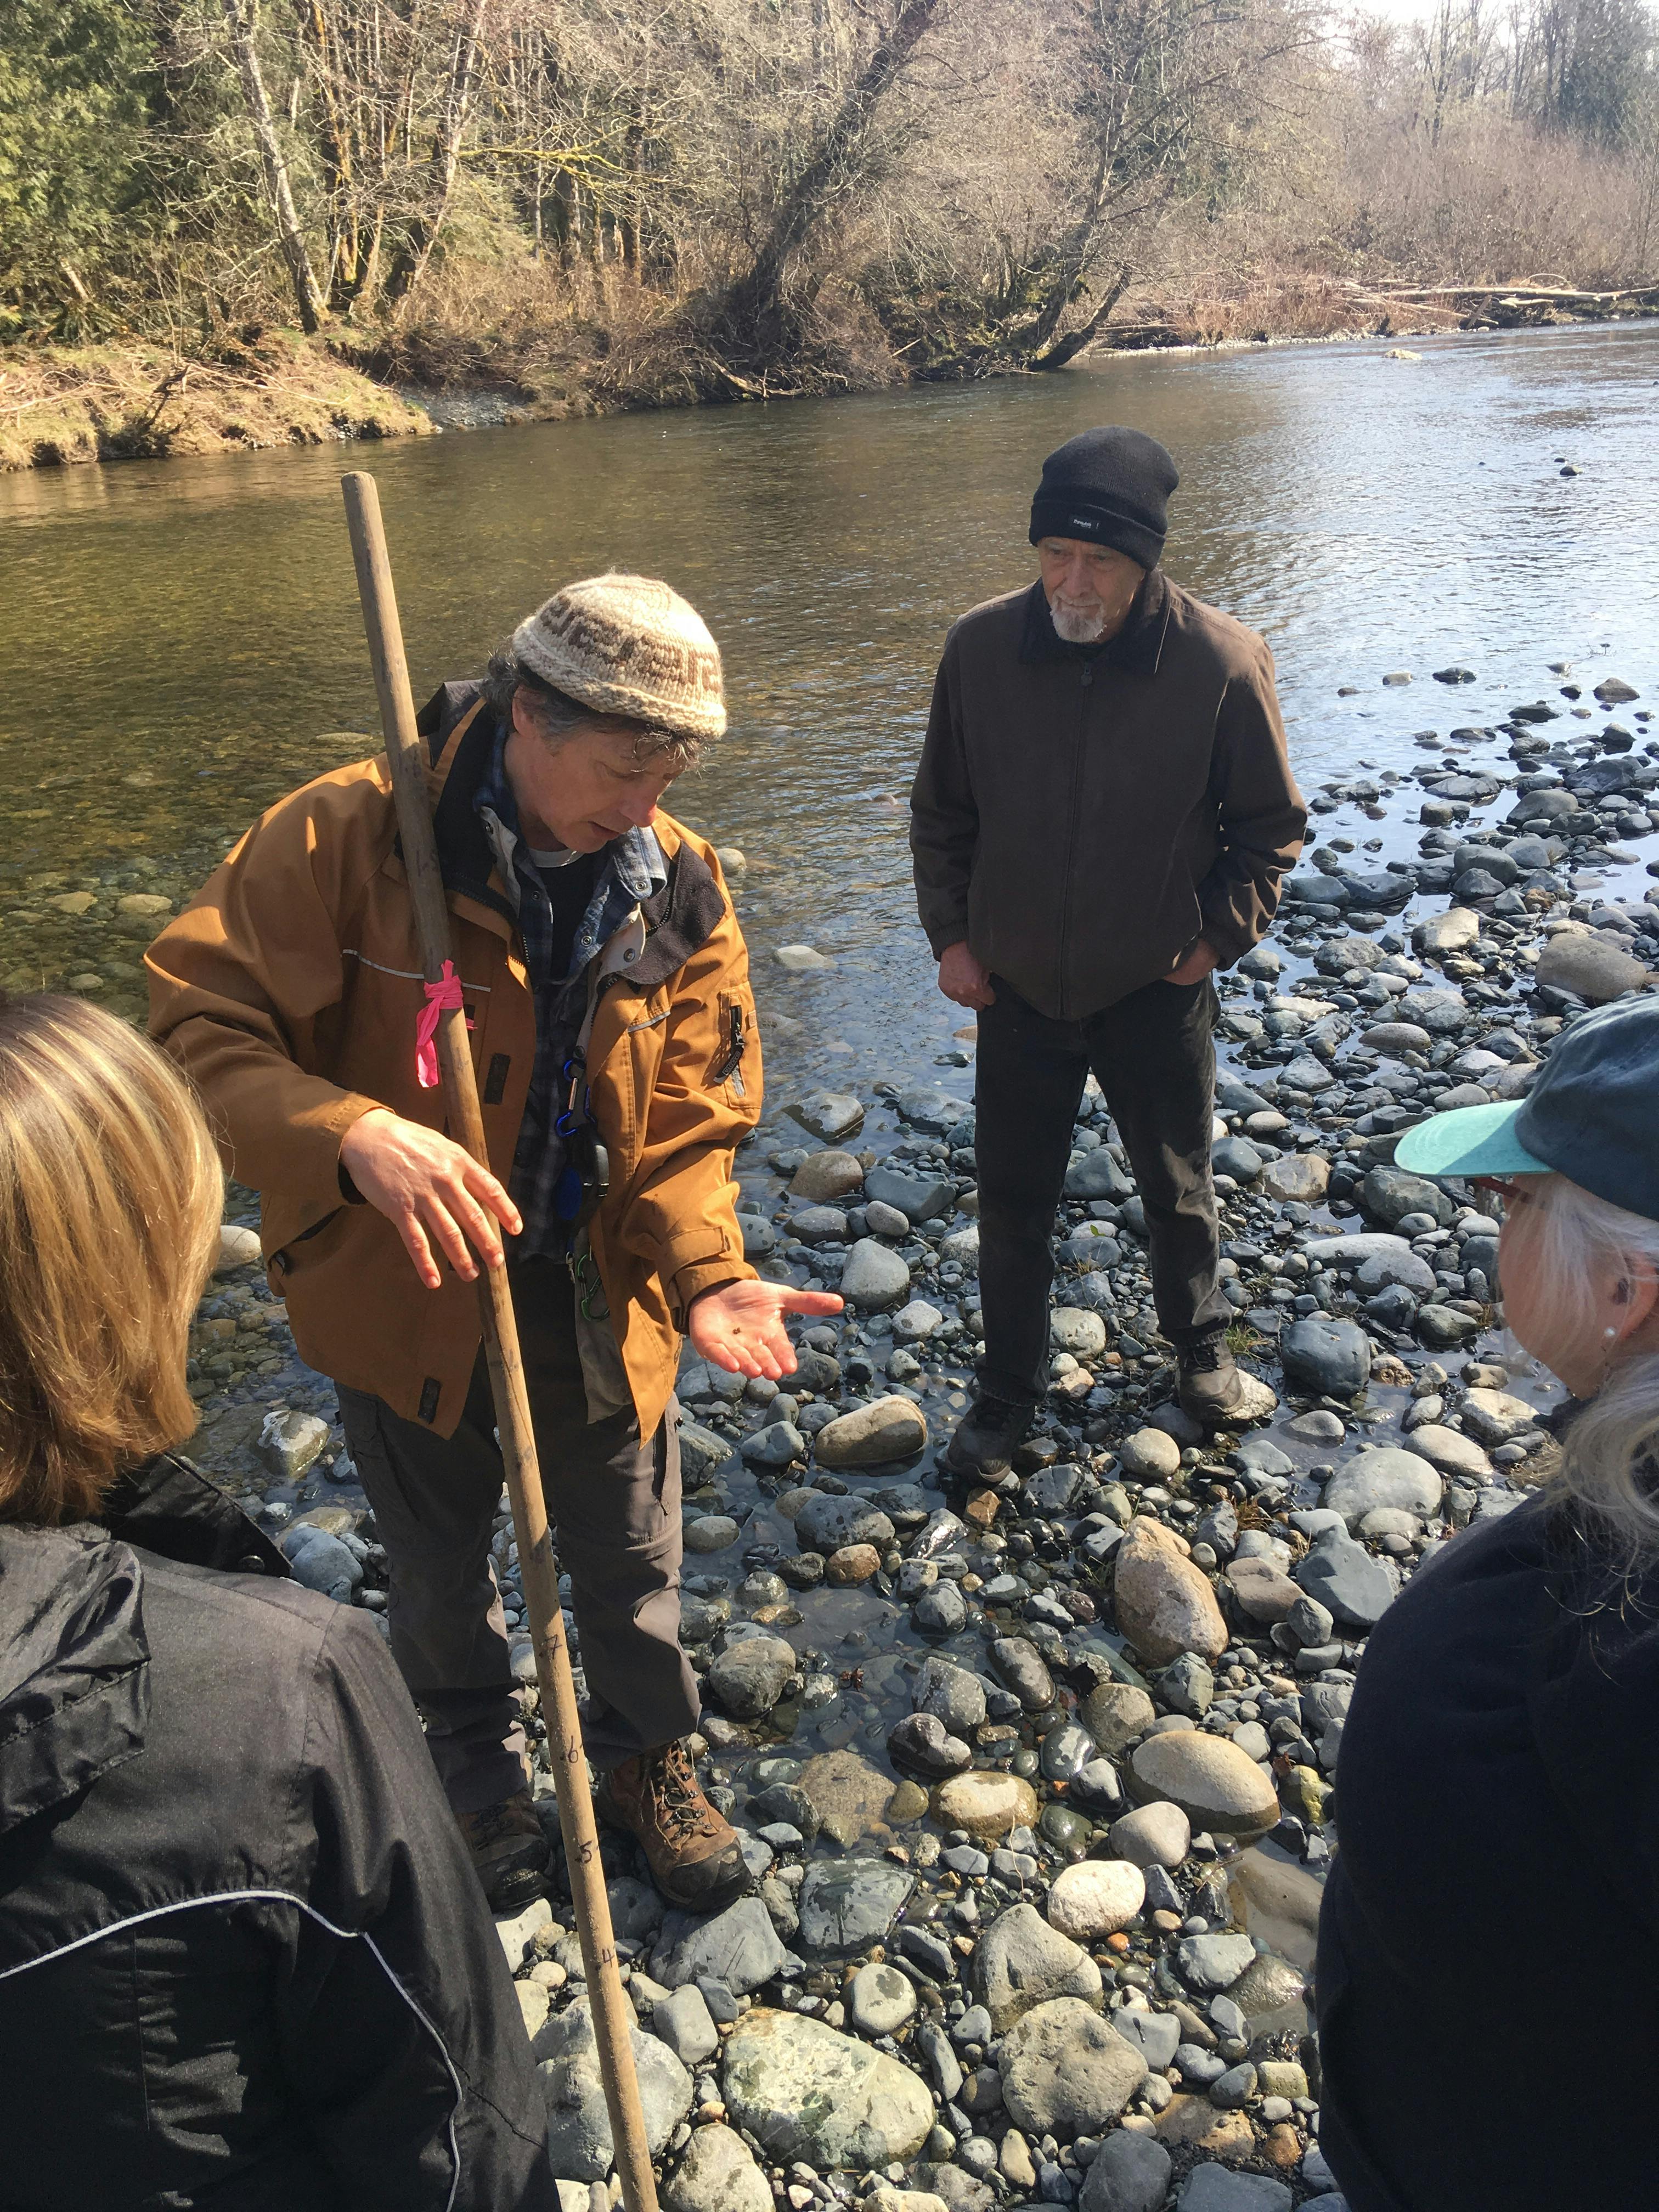 Biologist Dave Clough shares his knowledge on a 2019 Little Qualicum Stream Walk